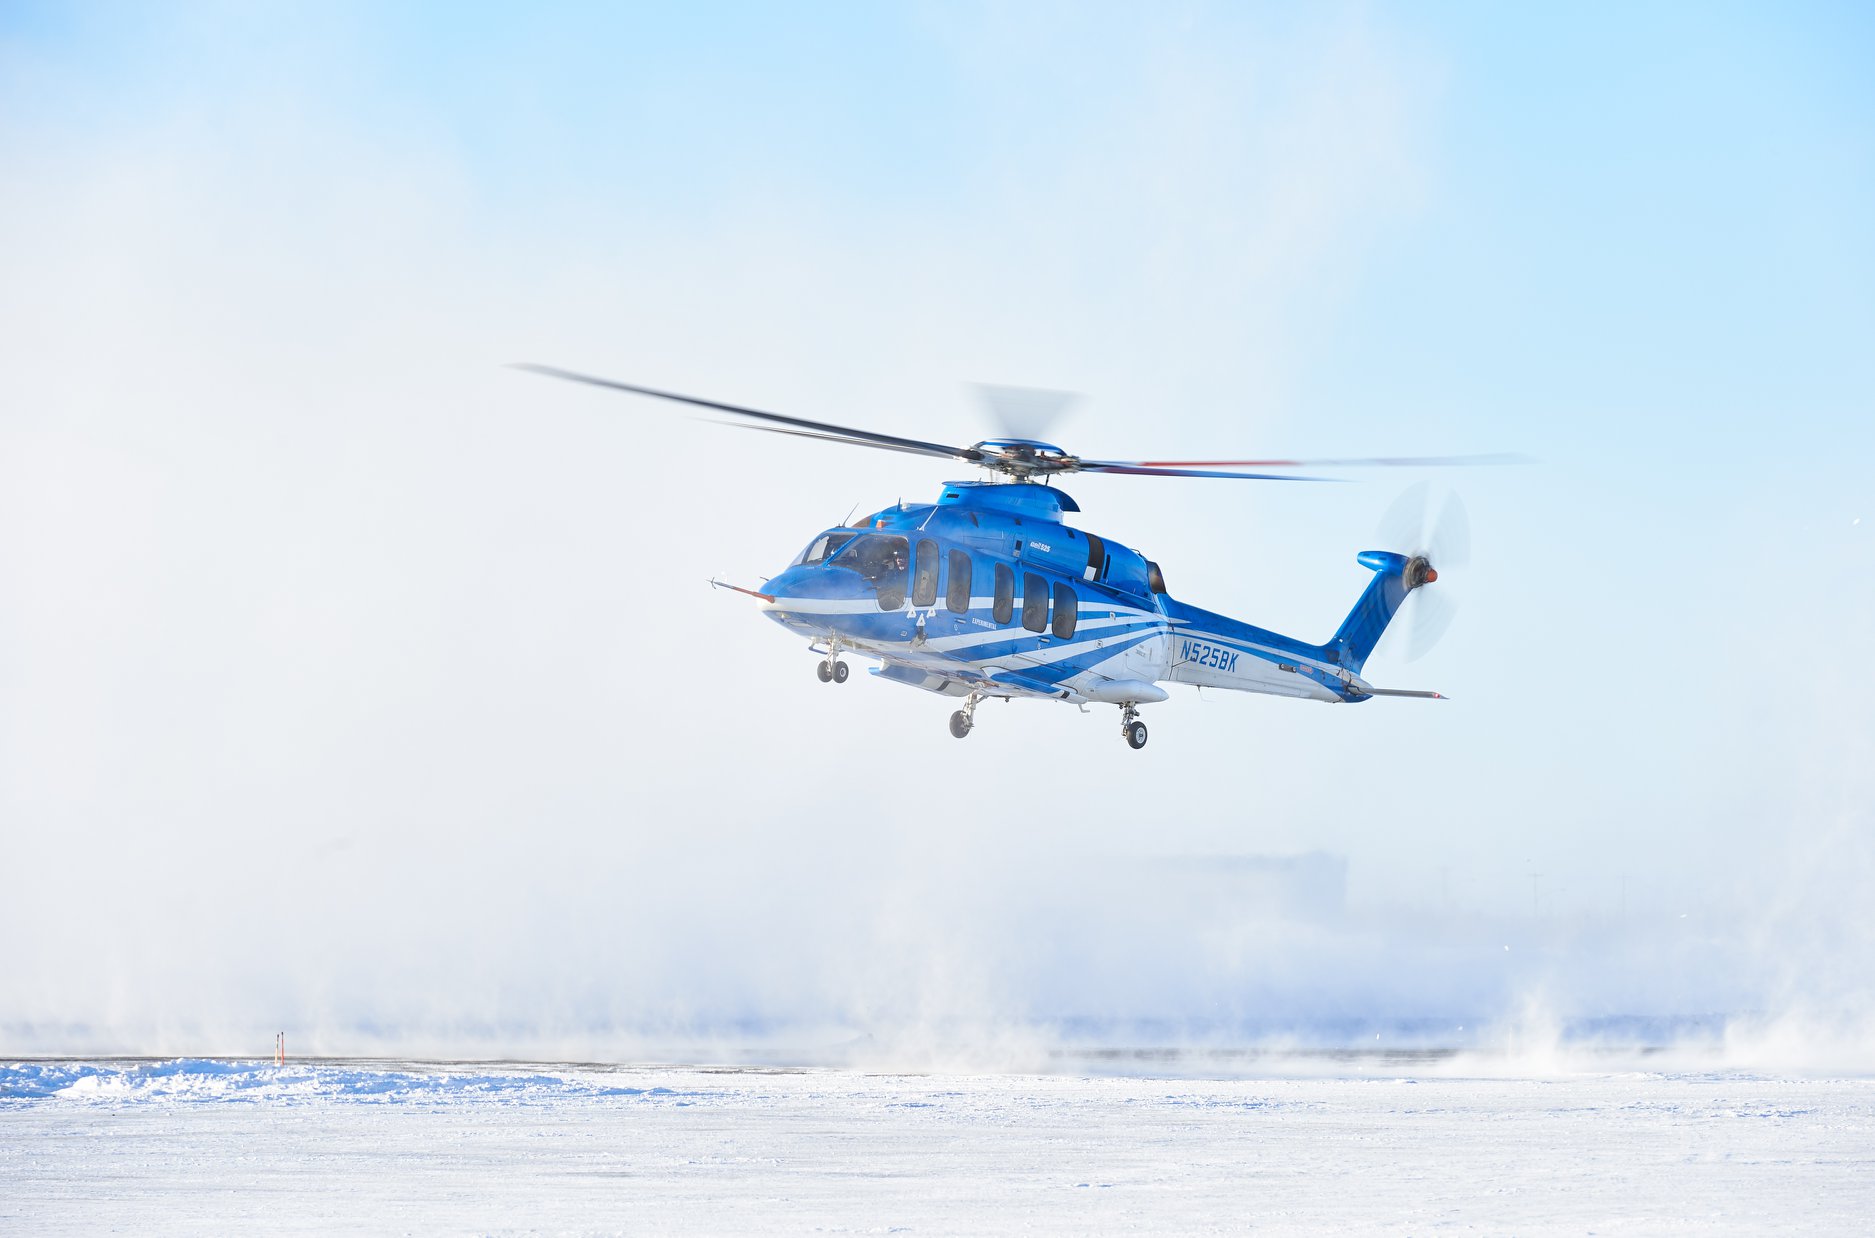 Bell began flight testing the 525 in Yellowknife, Northwest Territories, in January 2019. The type has now accrued more than 1,000 flight hours. Stephen Fochuk Photo